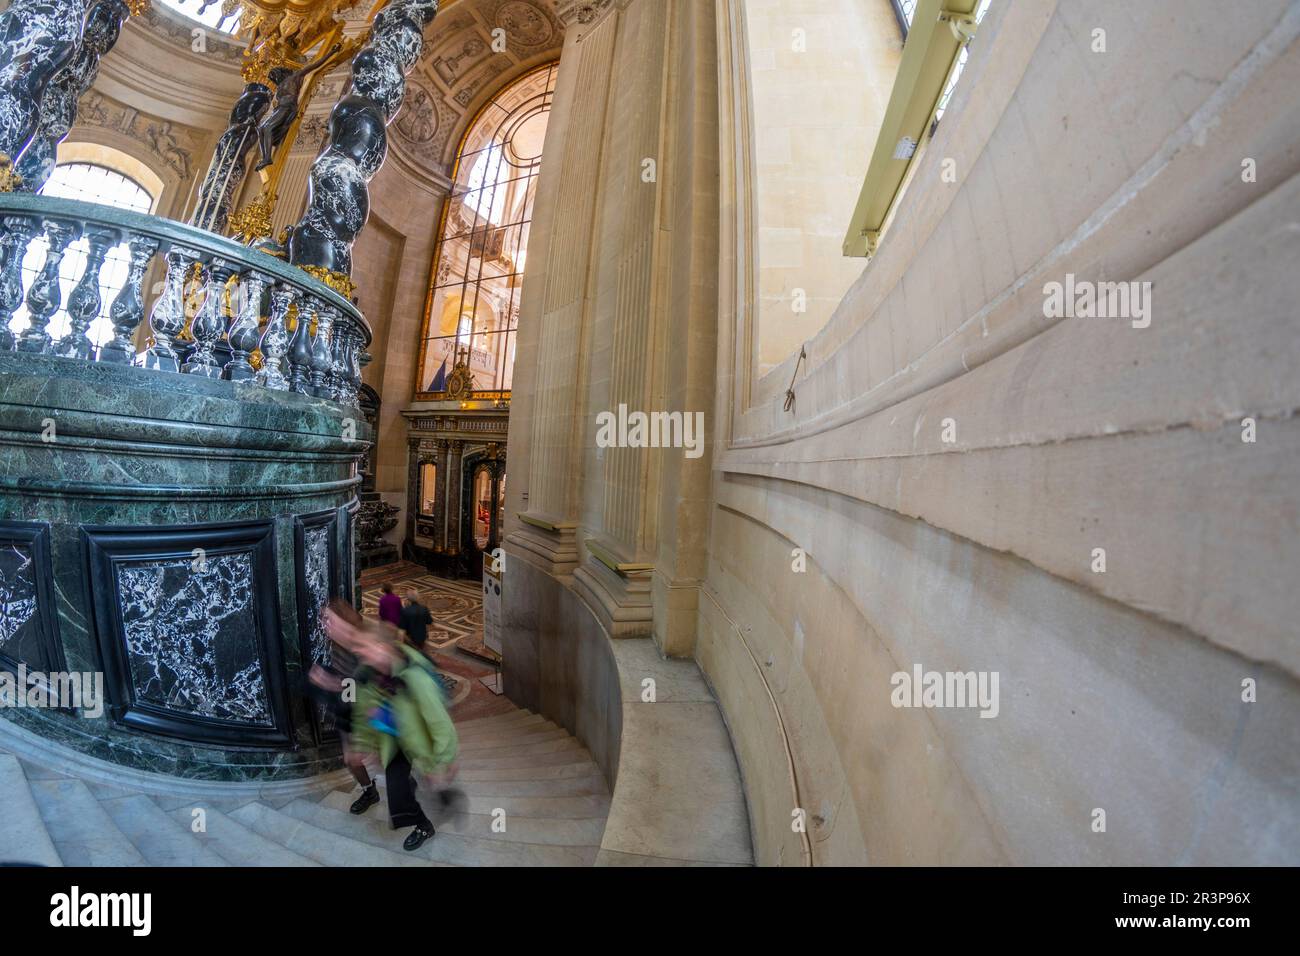 A staircase, ornaments and windows Napoleon's tomb at Les invalides. Stock Photo